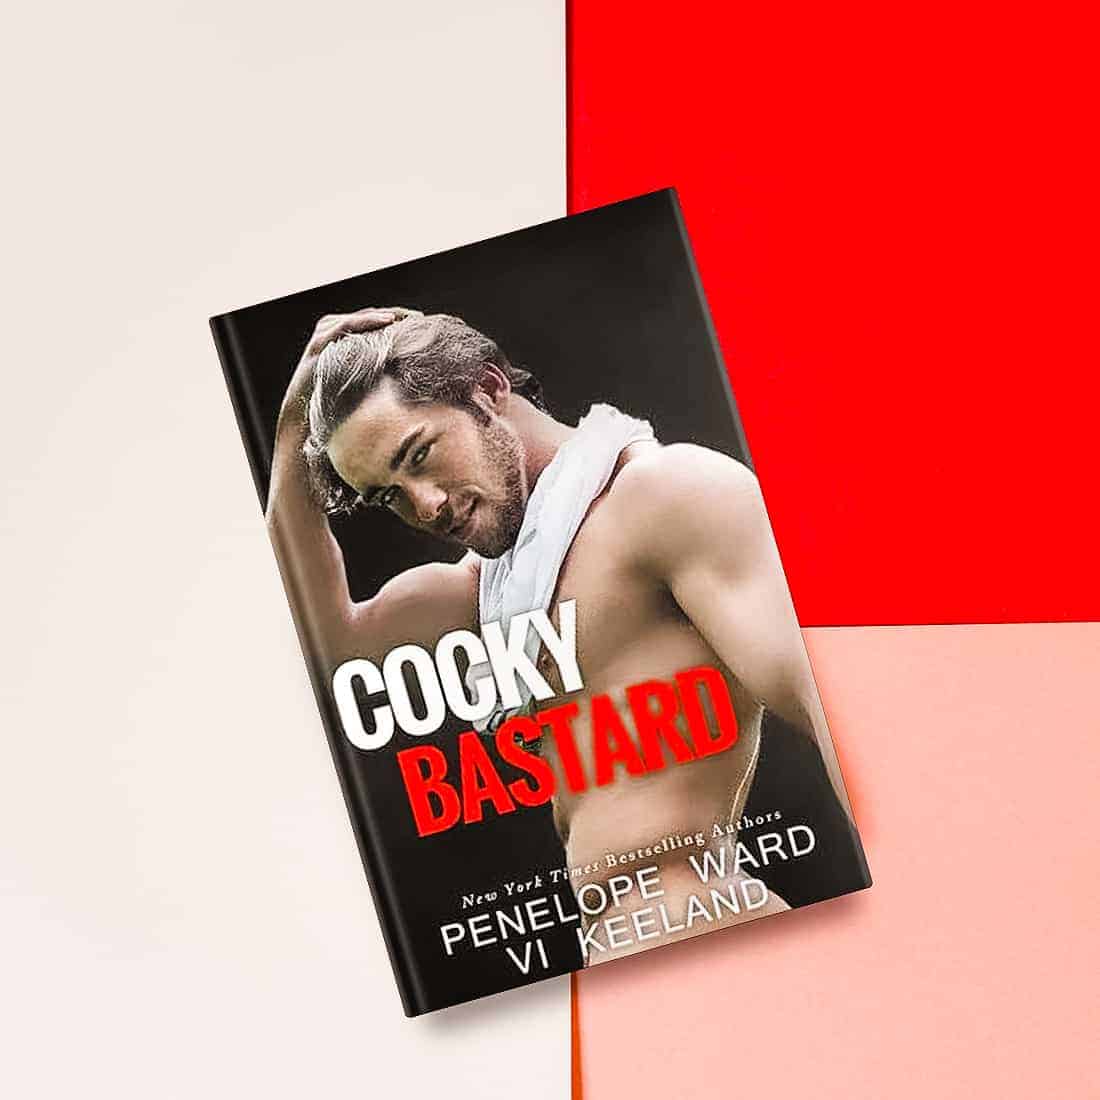 Cocky Bastard by Penelope Ward & Vi Keeland – Review + Read Ch 1